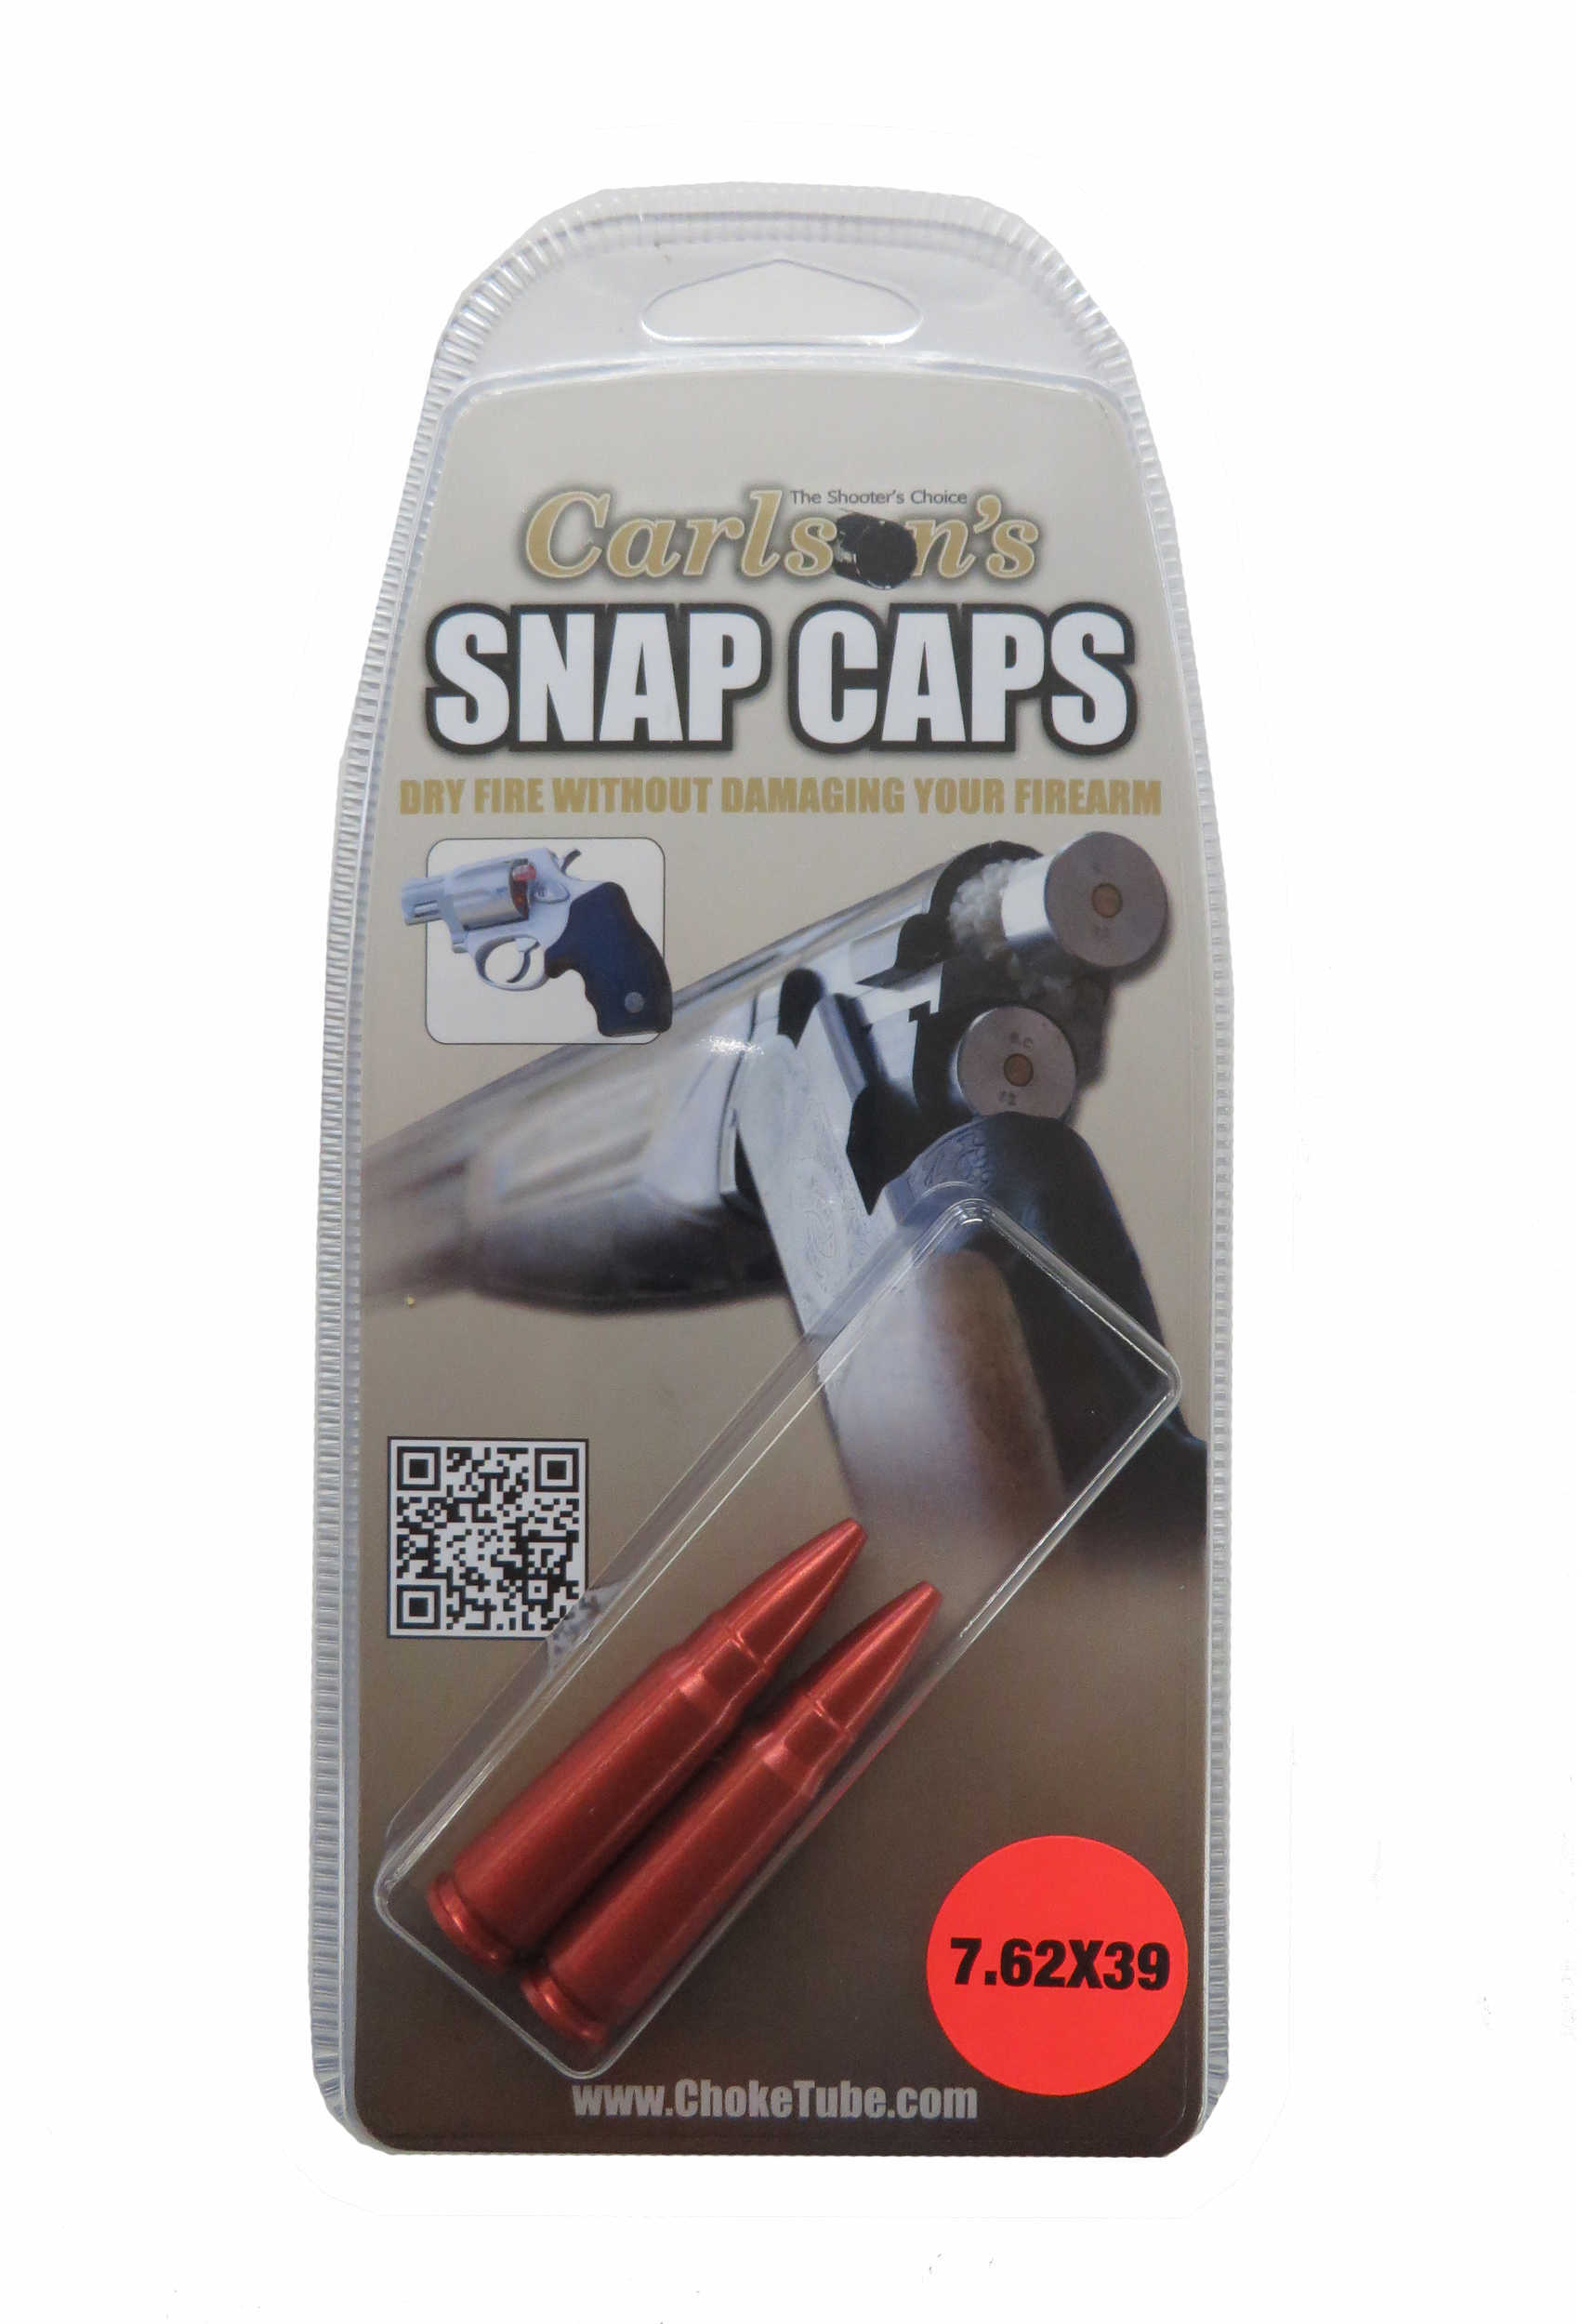 Carlsons Snap Caps 7.62 X 39 (2-Pack) Md: 00046